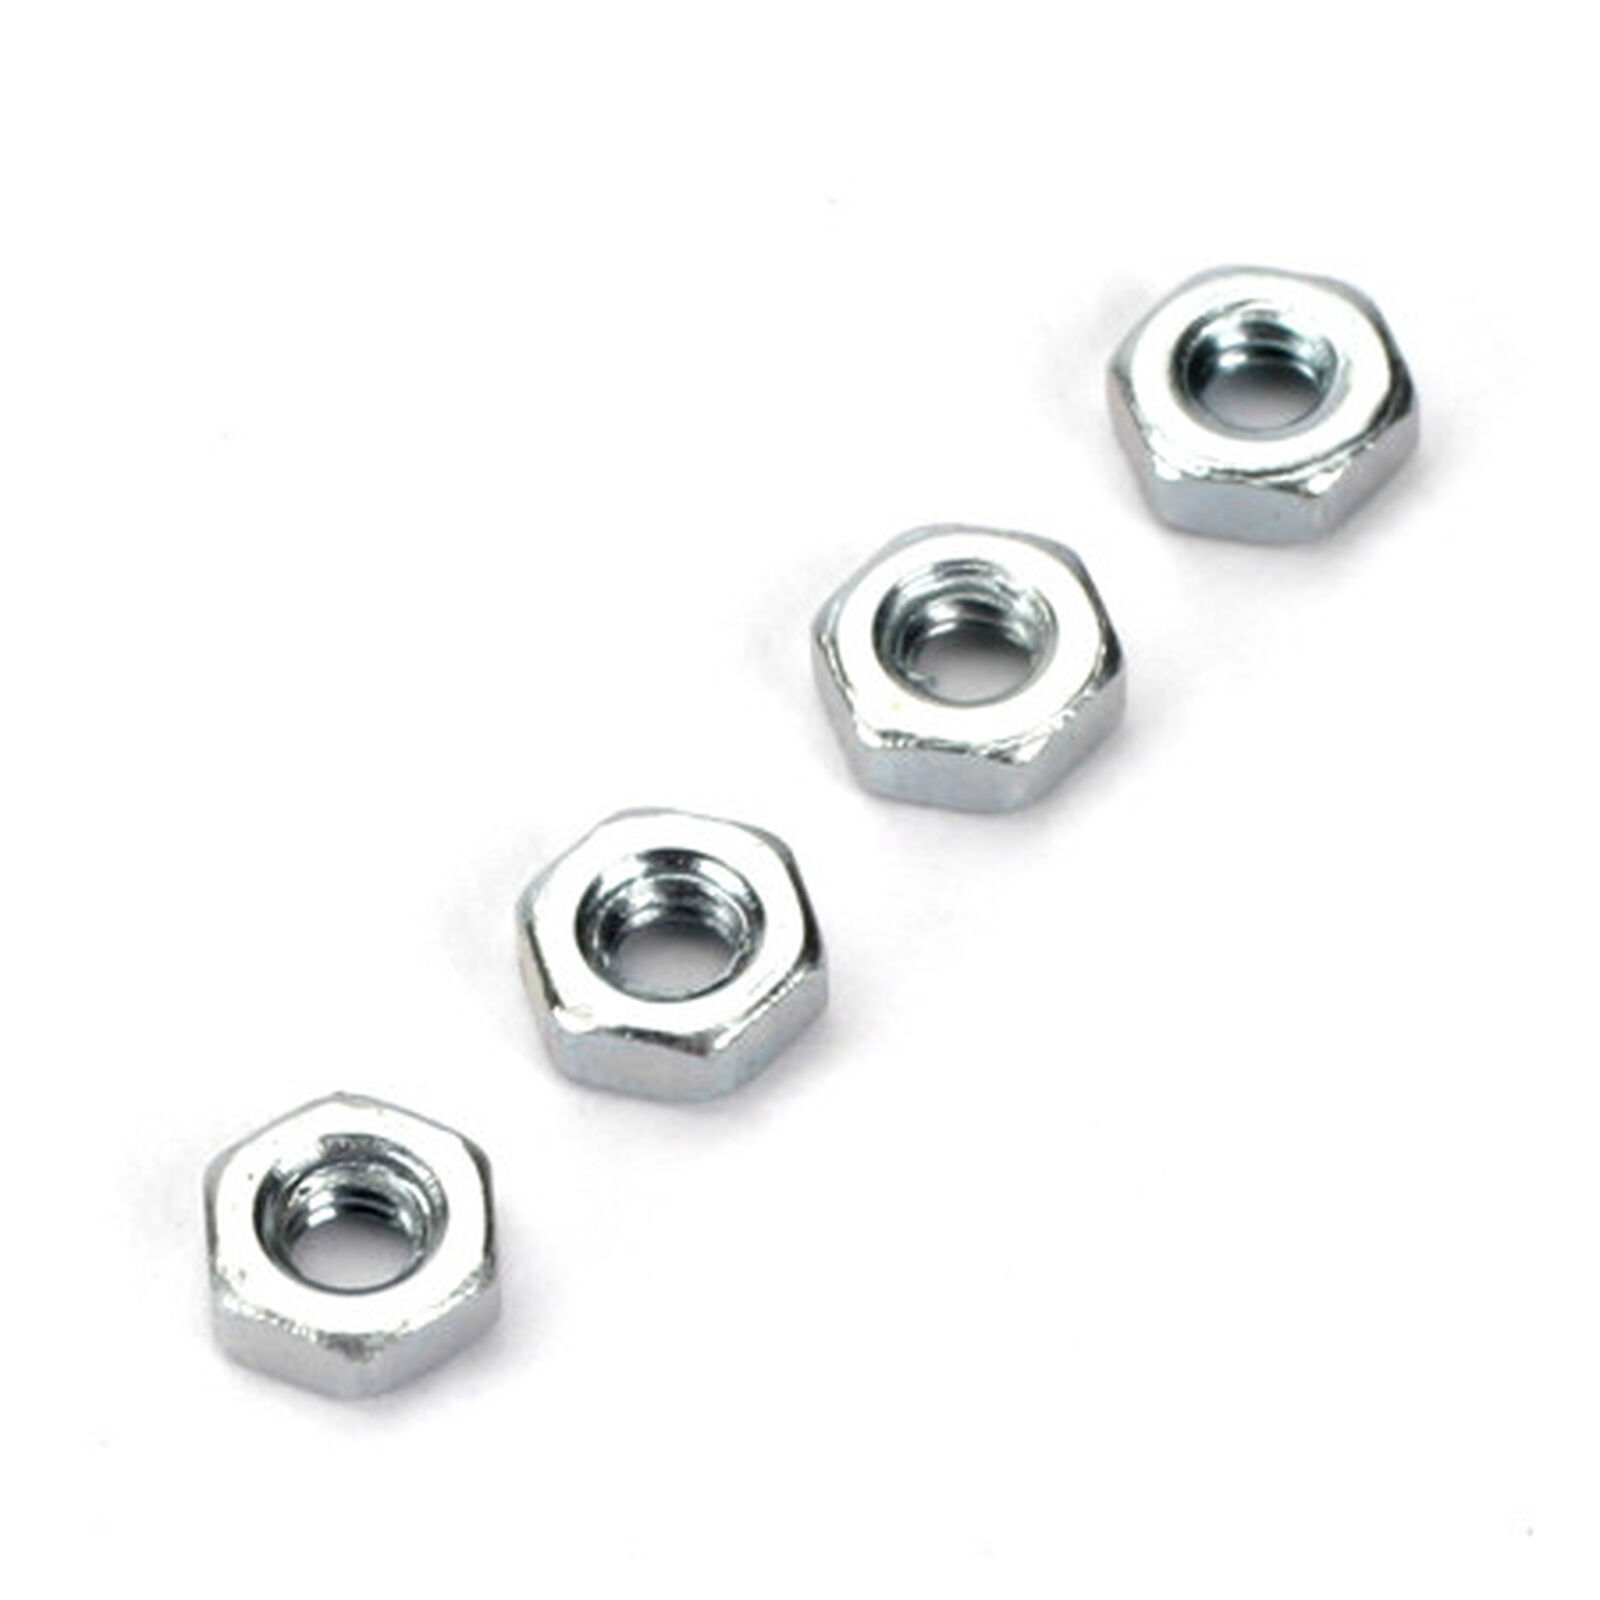 Hex Nuts, 2mm